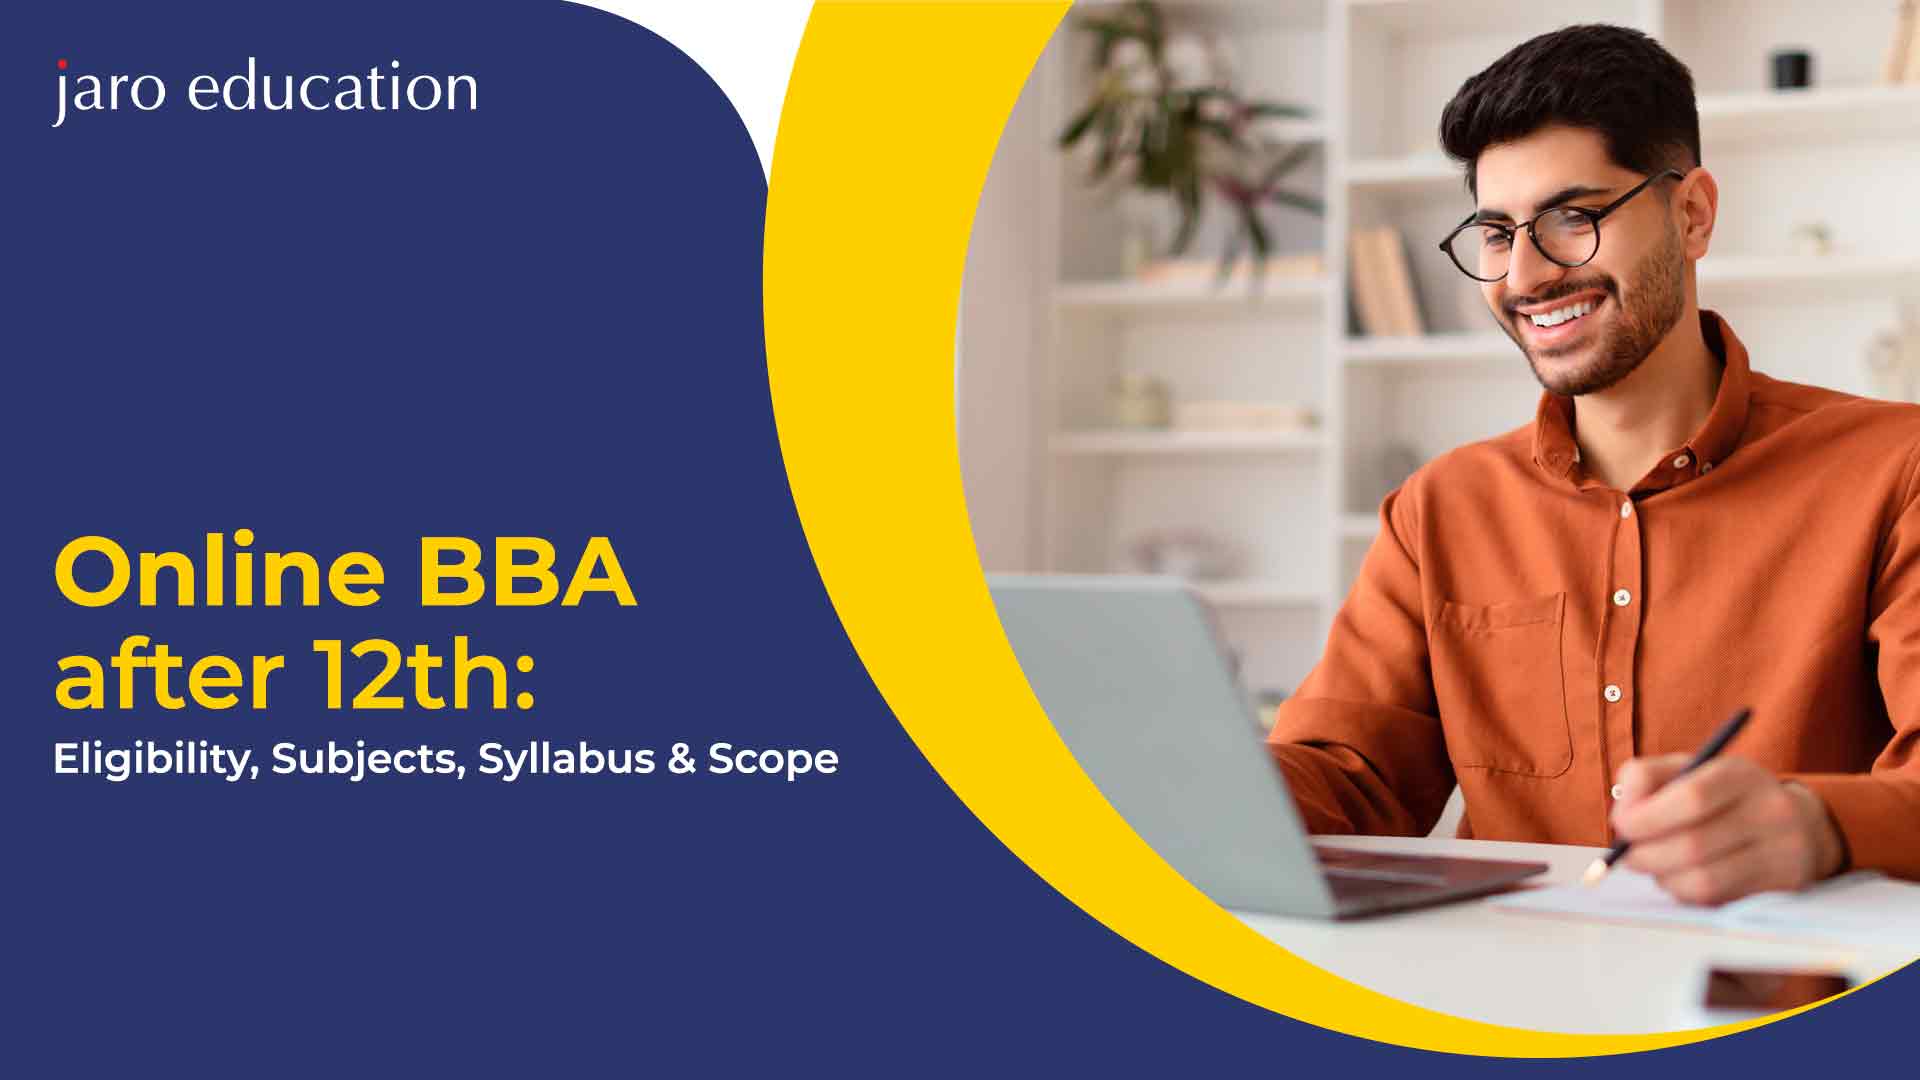 Online-BBA-after-12th-Eligibility,-Subjects,-Syllabus-&-Scope Blog